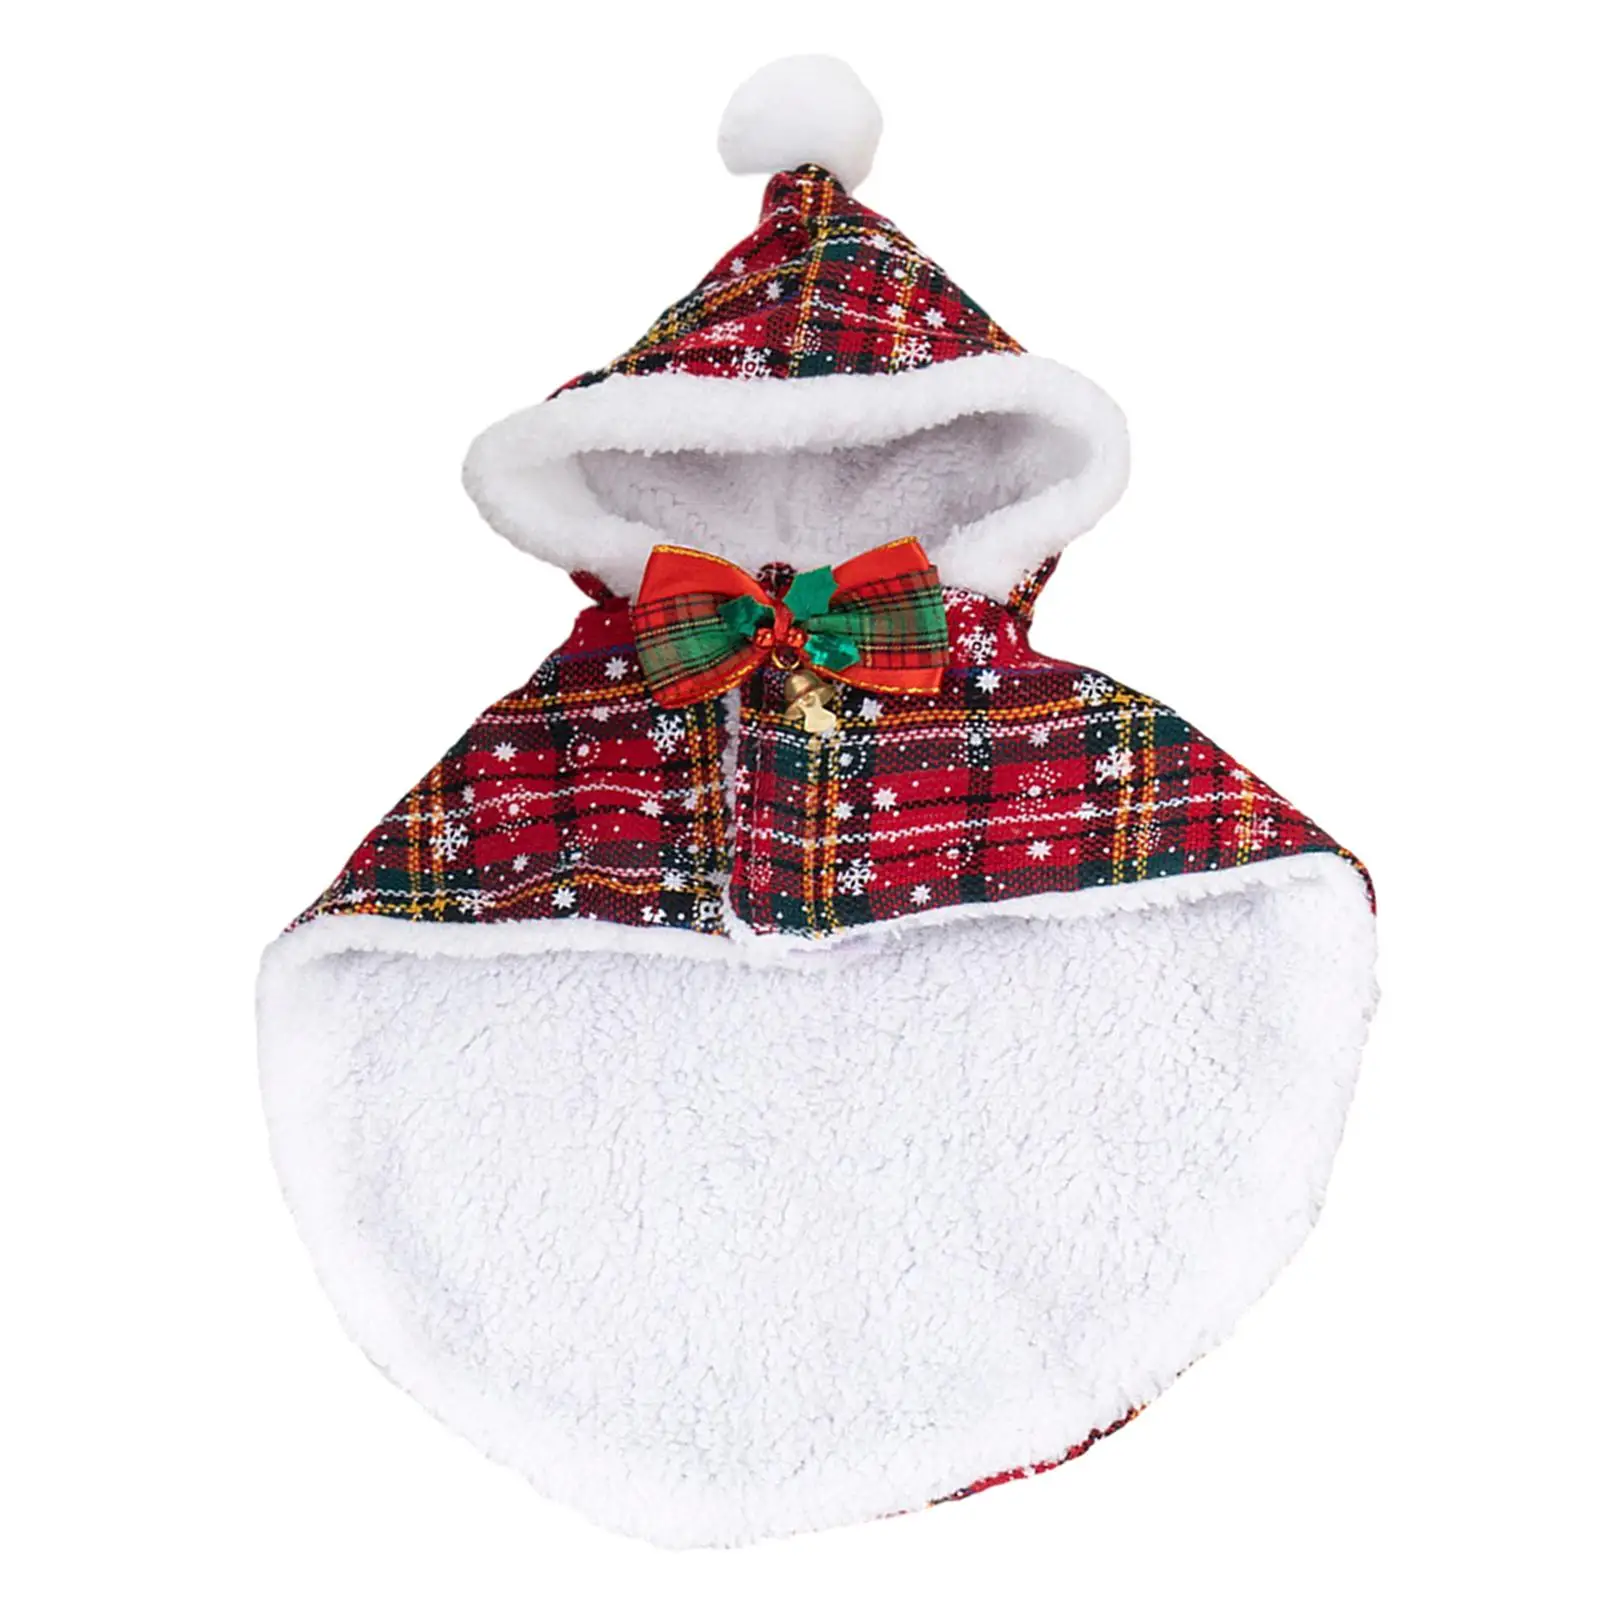 Dog Christmas Costume New Year Funny Dress Warm Clothes Puppy Cape Cat Hoodies for Cats Puppy Kitten Small Medium Dog Pets